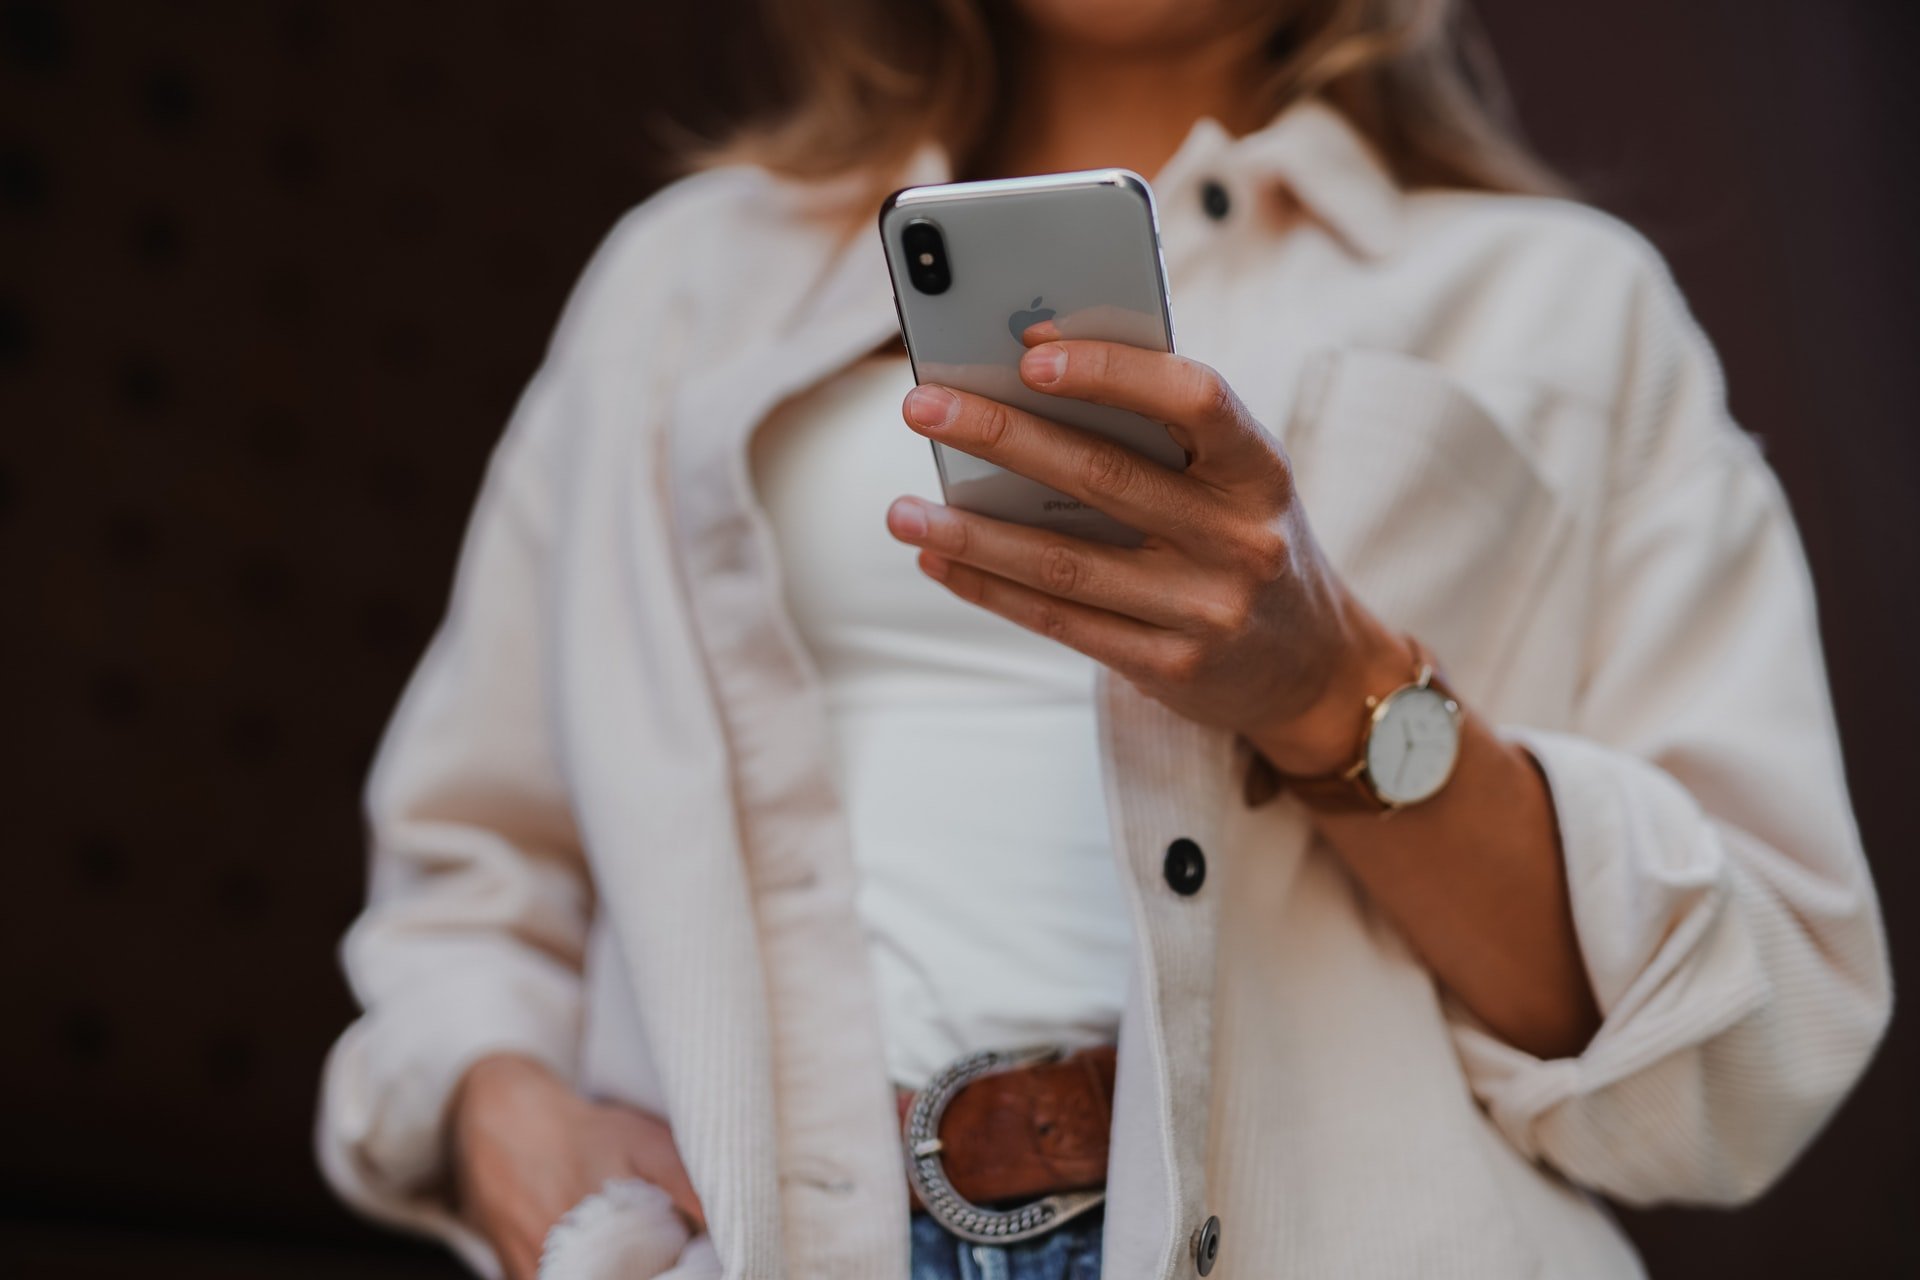 She picked her phone to check the news | Source: Unsplash